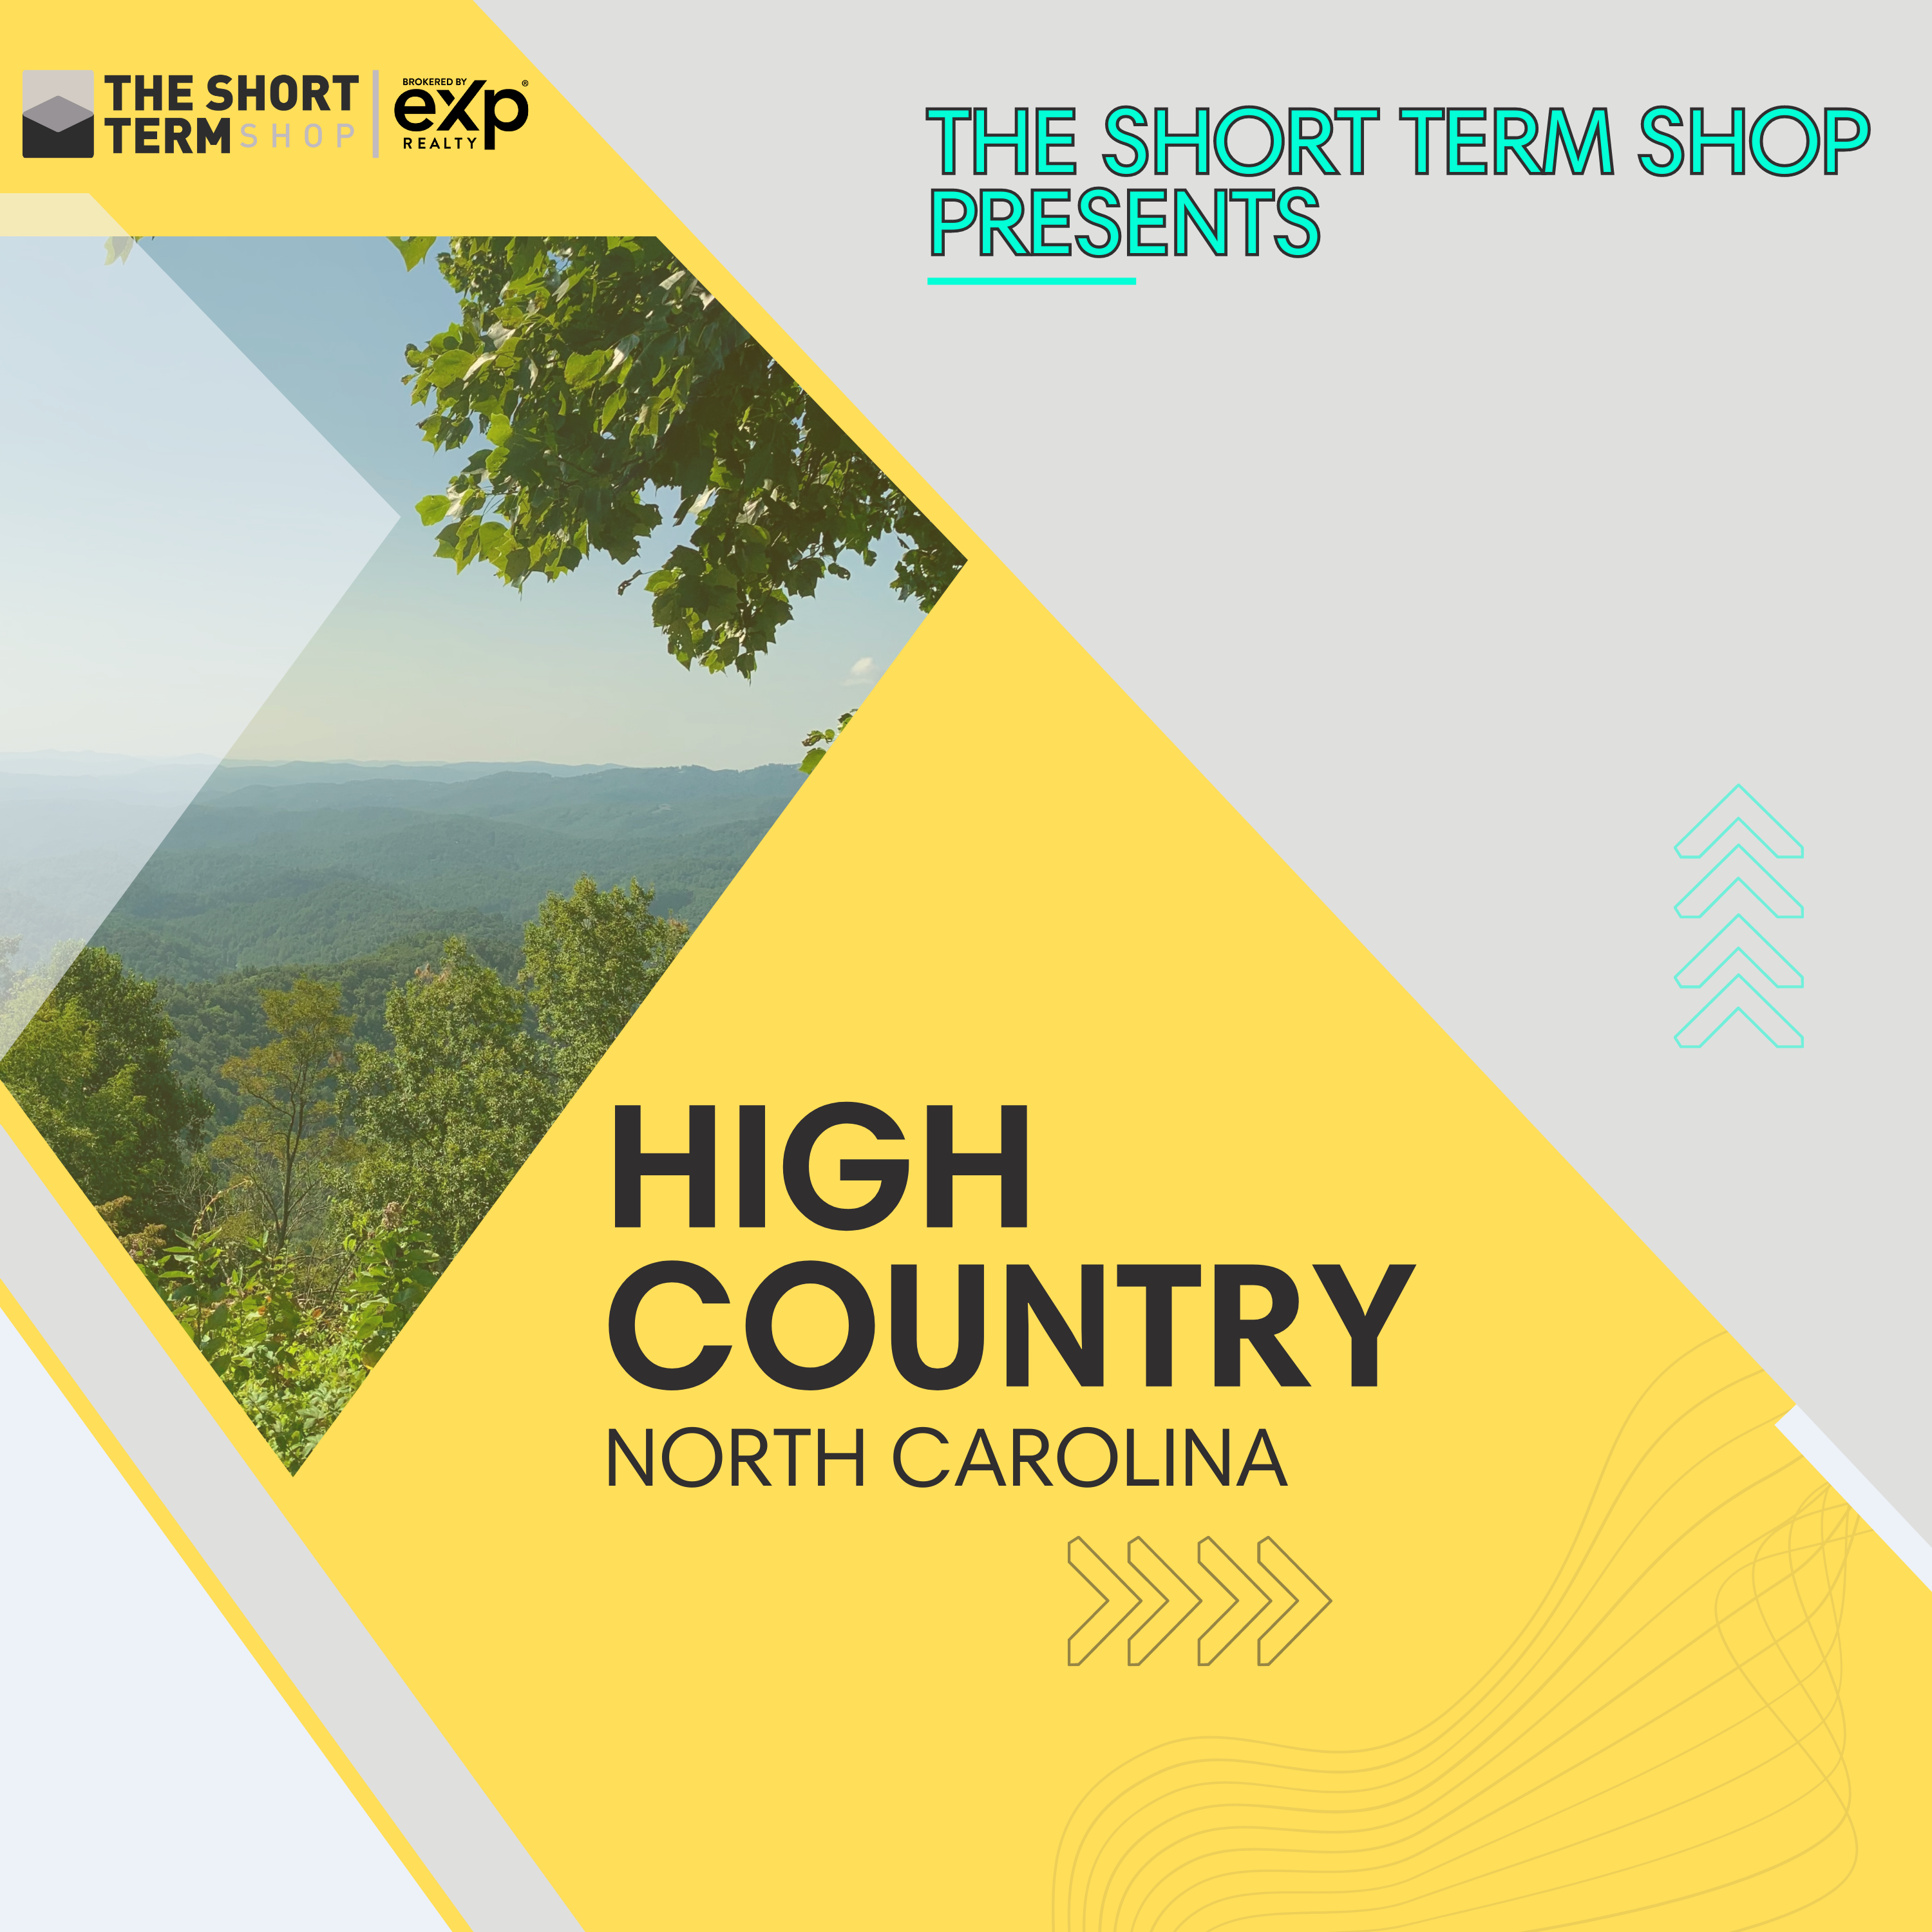 Buying an Airbnb in the High Country of North Carolina